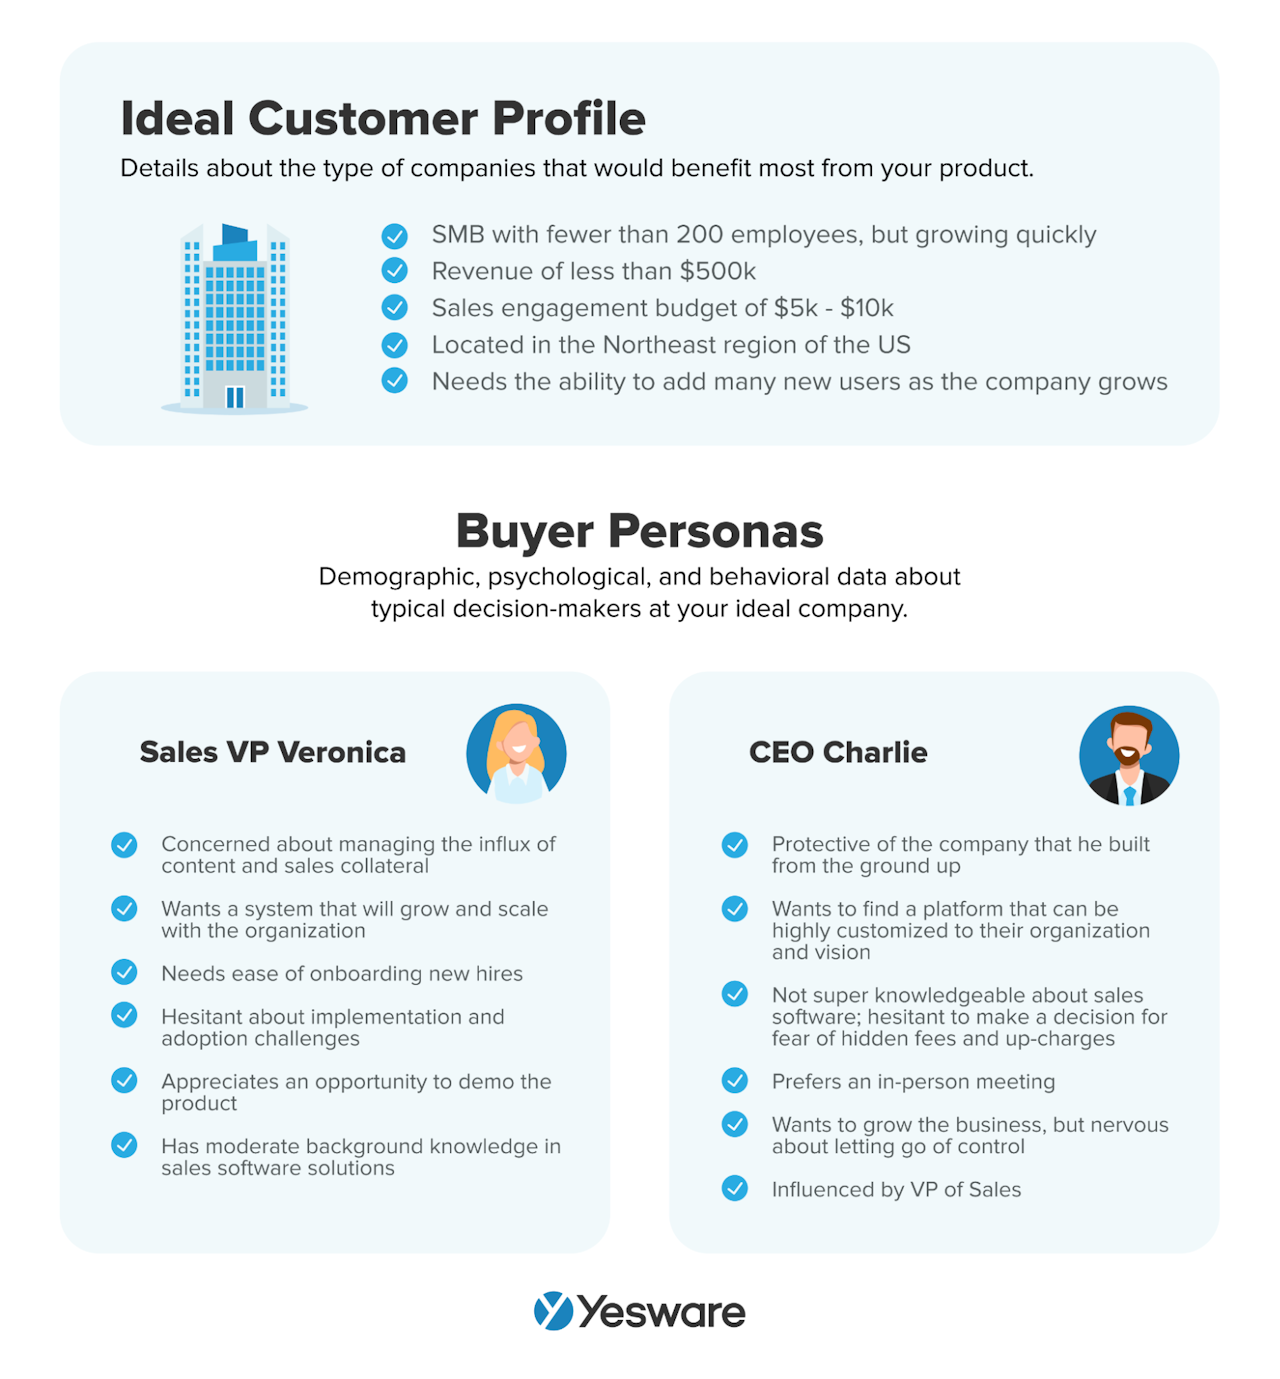 upselling and cross-selling: ICP and buyer personas